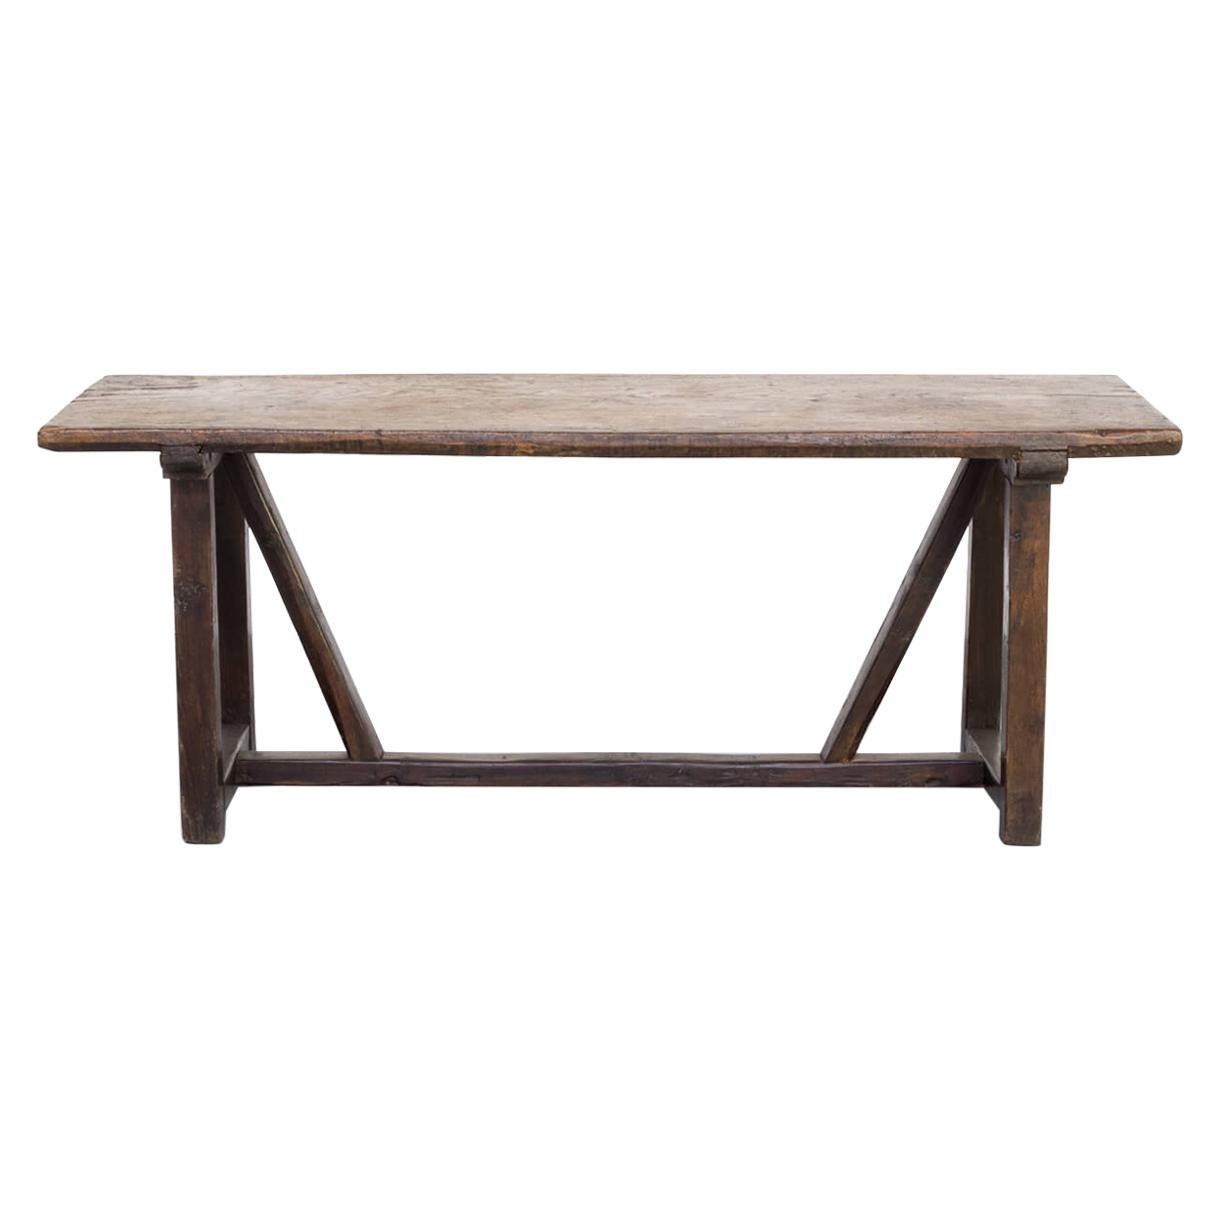 18th Century Antique Rustic Oak Dining / Side Table For Sale